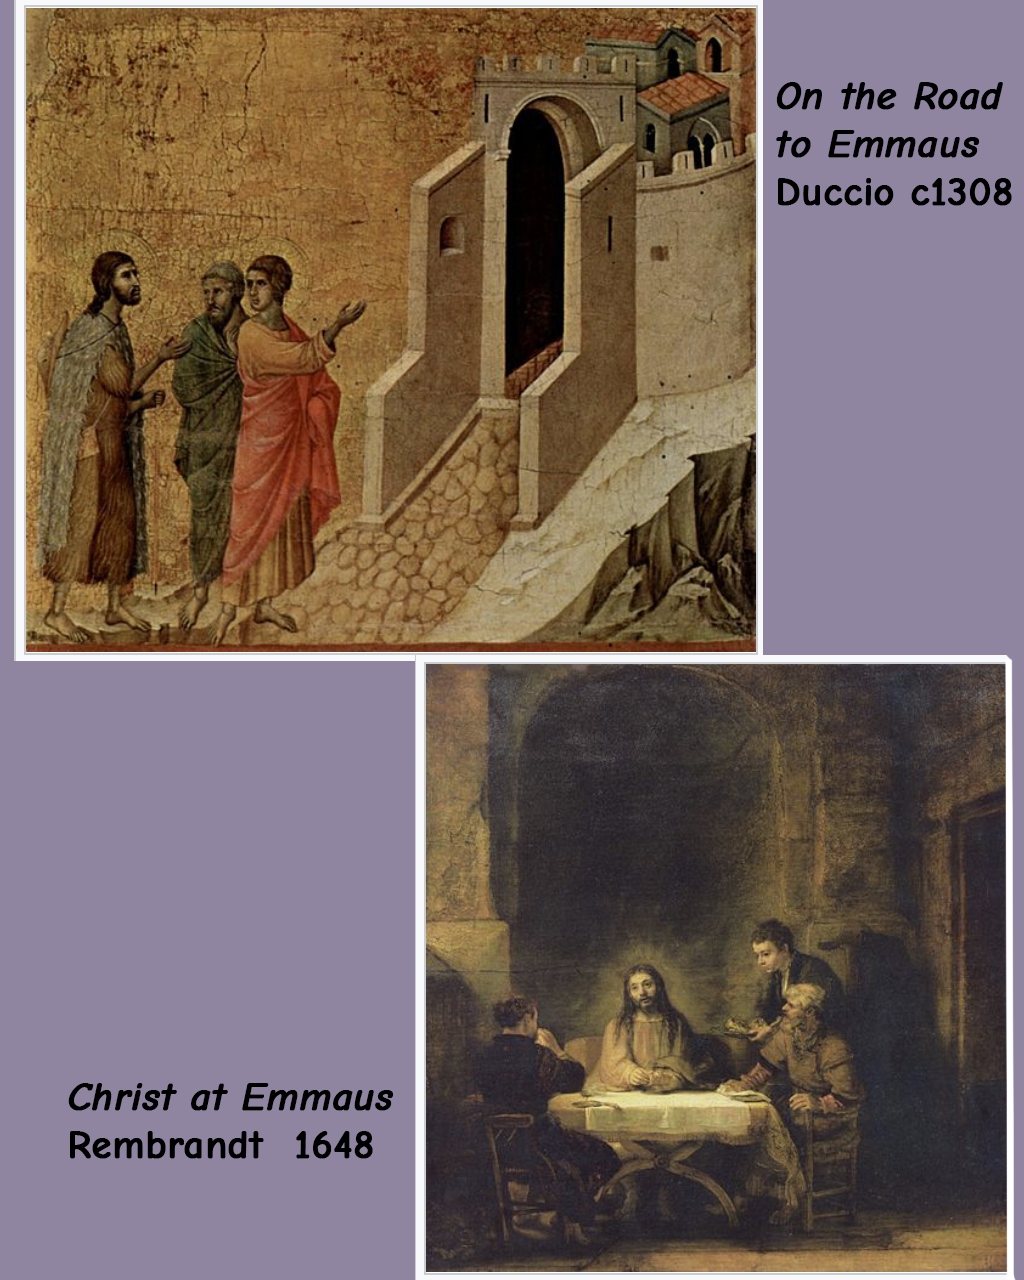 Two famous paintings, "On the Road to Emmaus" by Duccio from 1308-11, and "Christ at Emmaus" by Rembrandt from 1648.